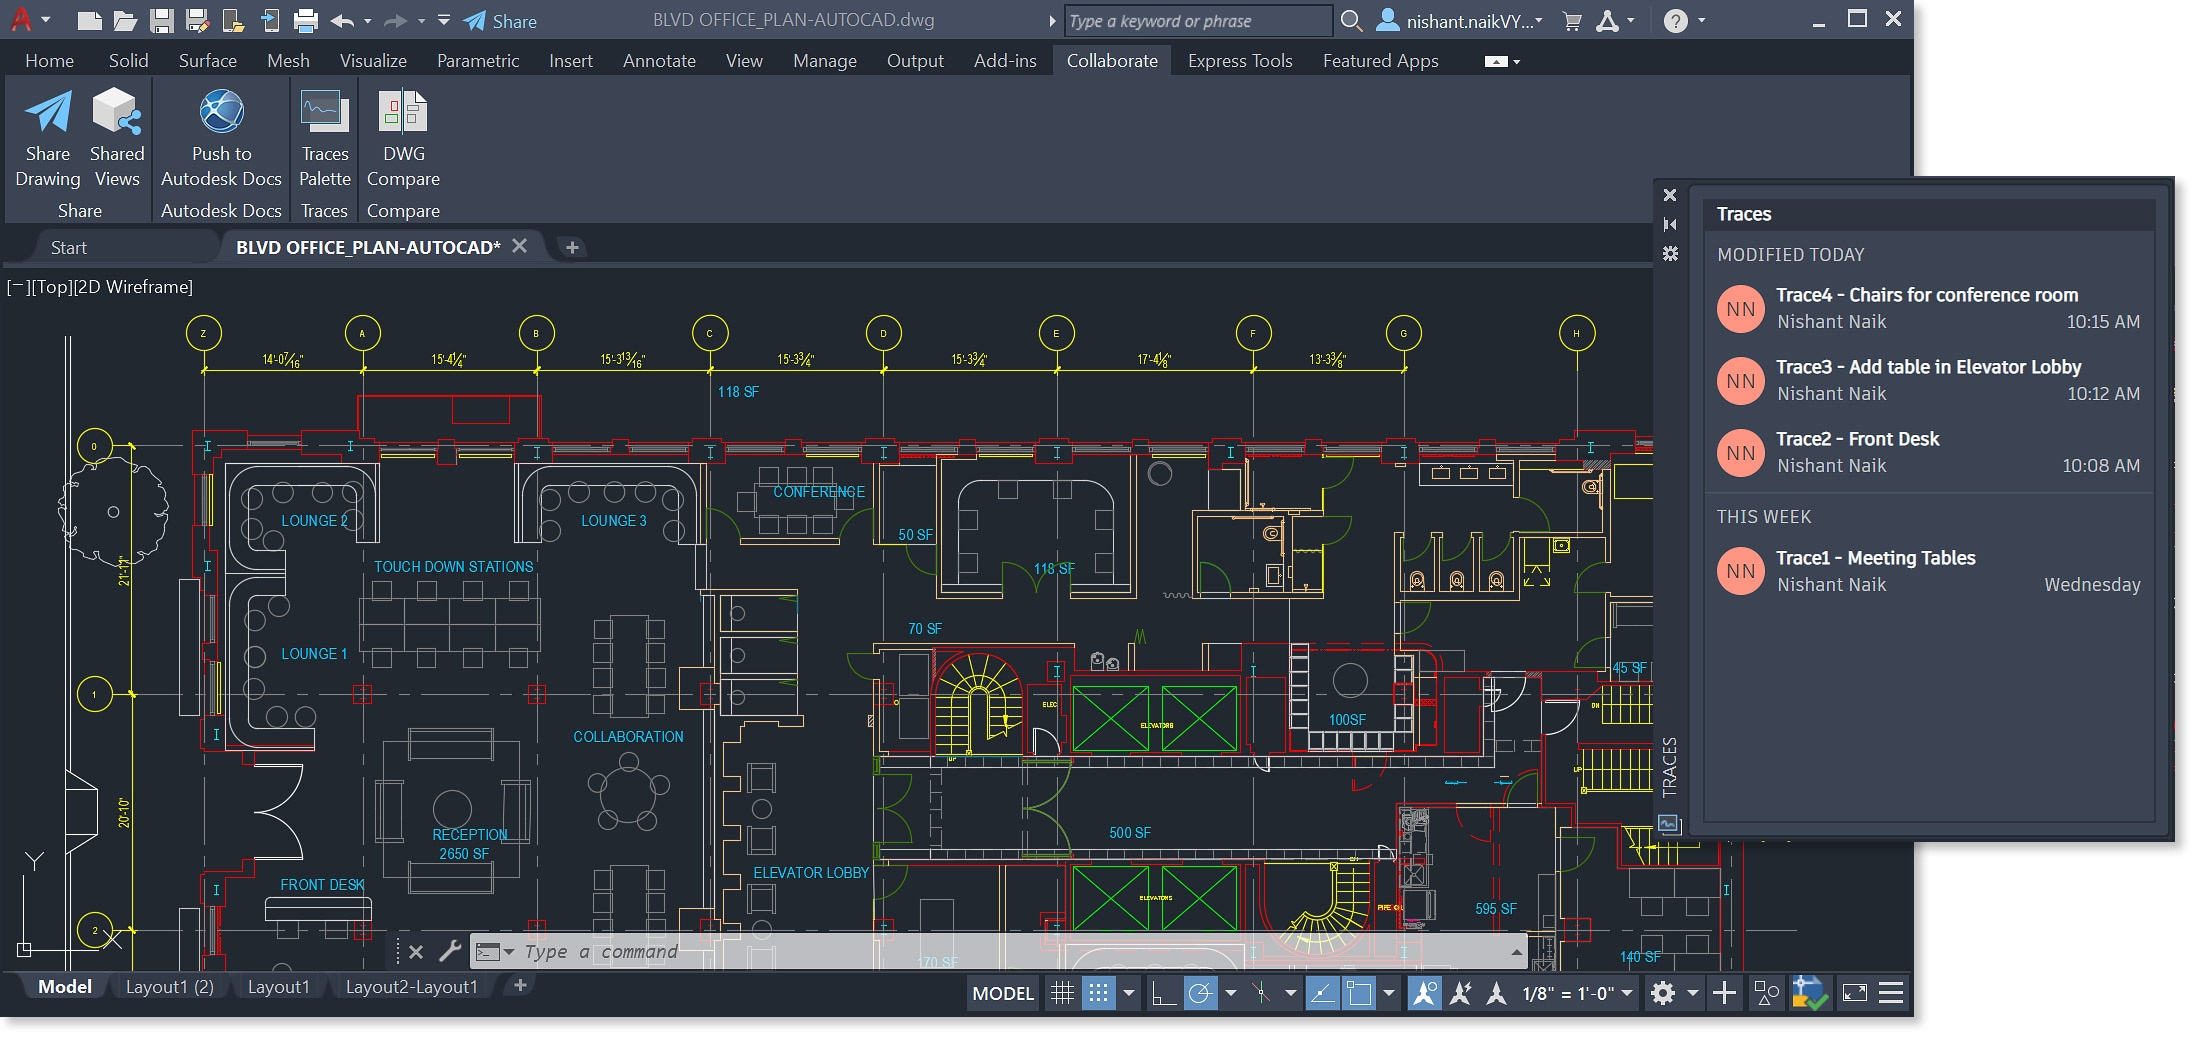 AutoCAD office floor plan schematic displaying key features